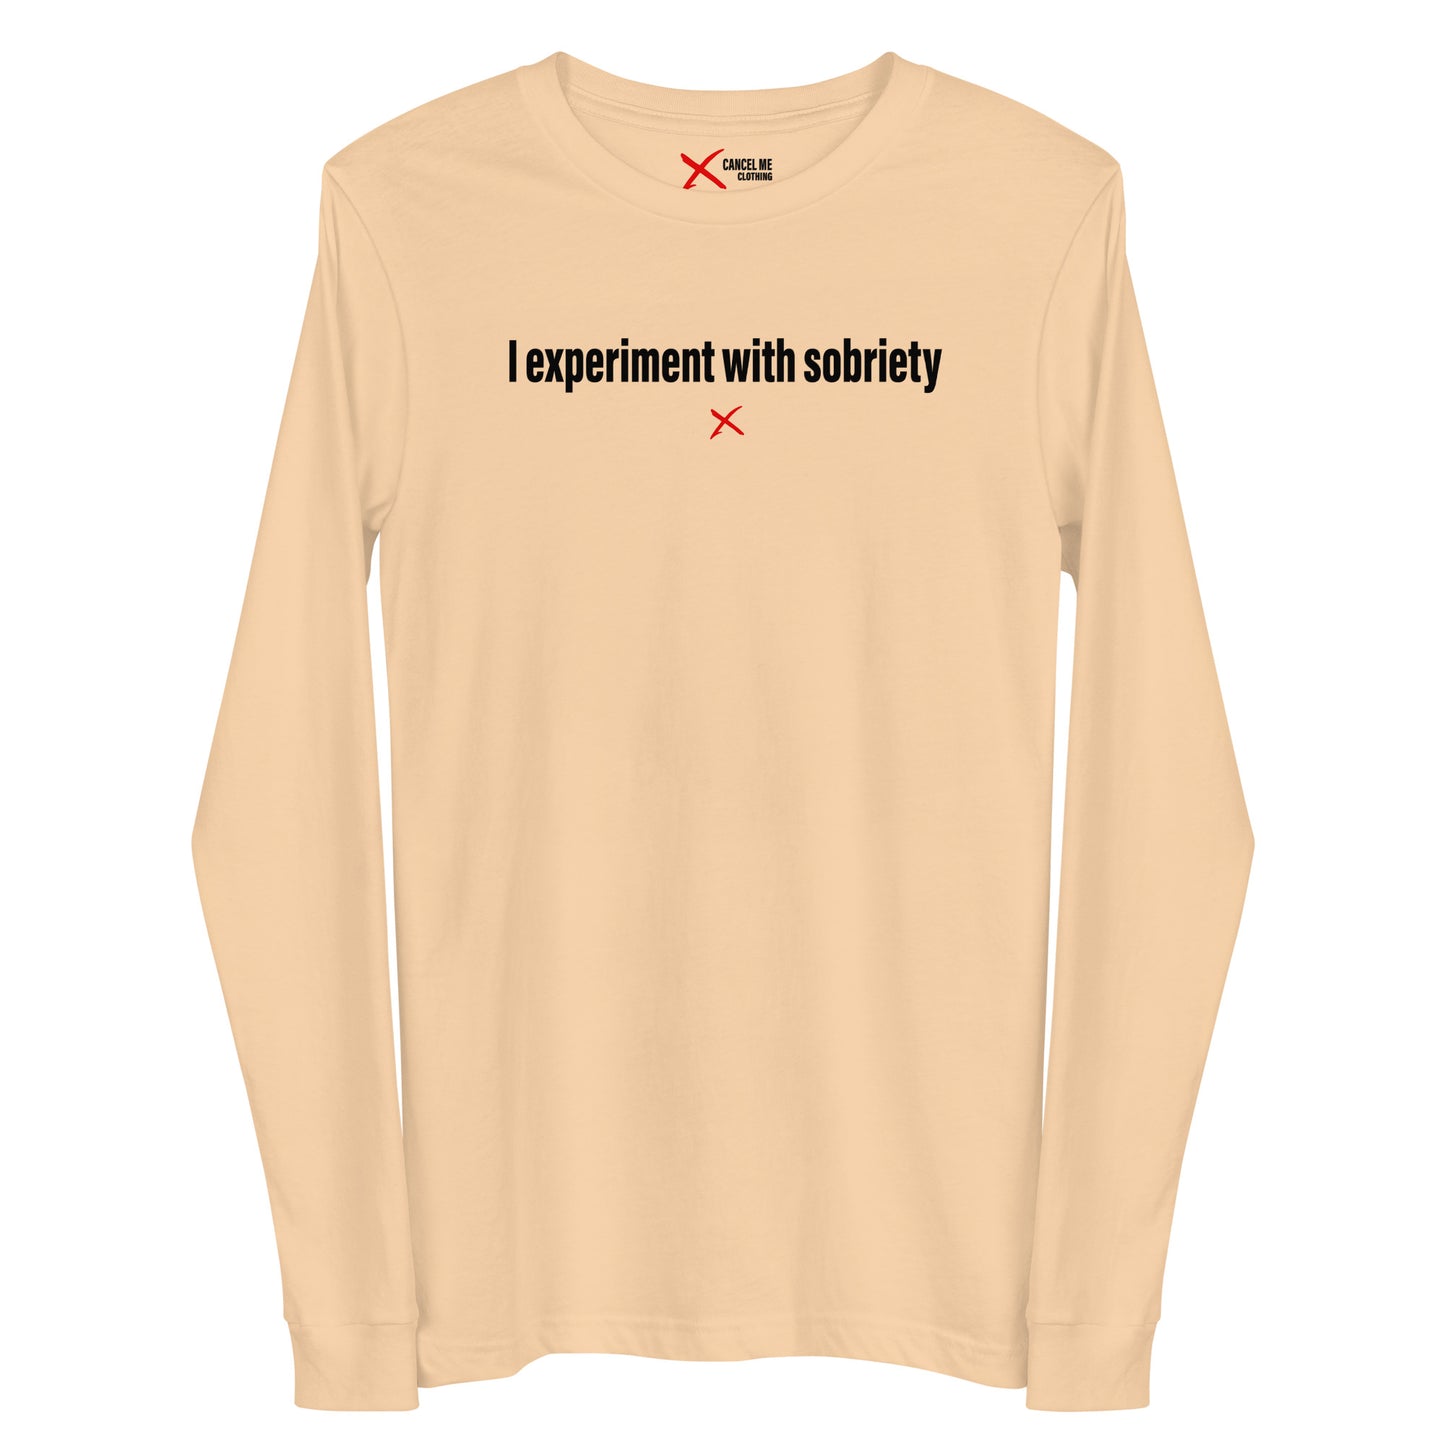 I experiment with sobriety - Longsleeve